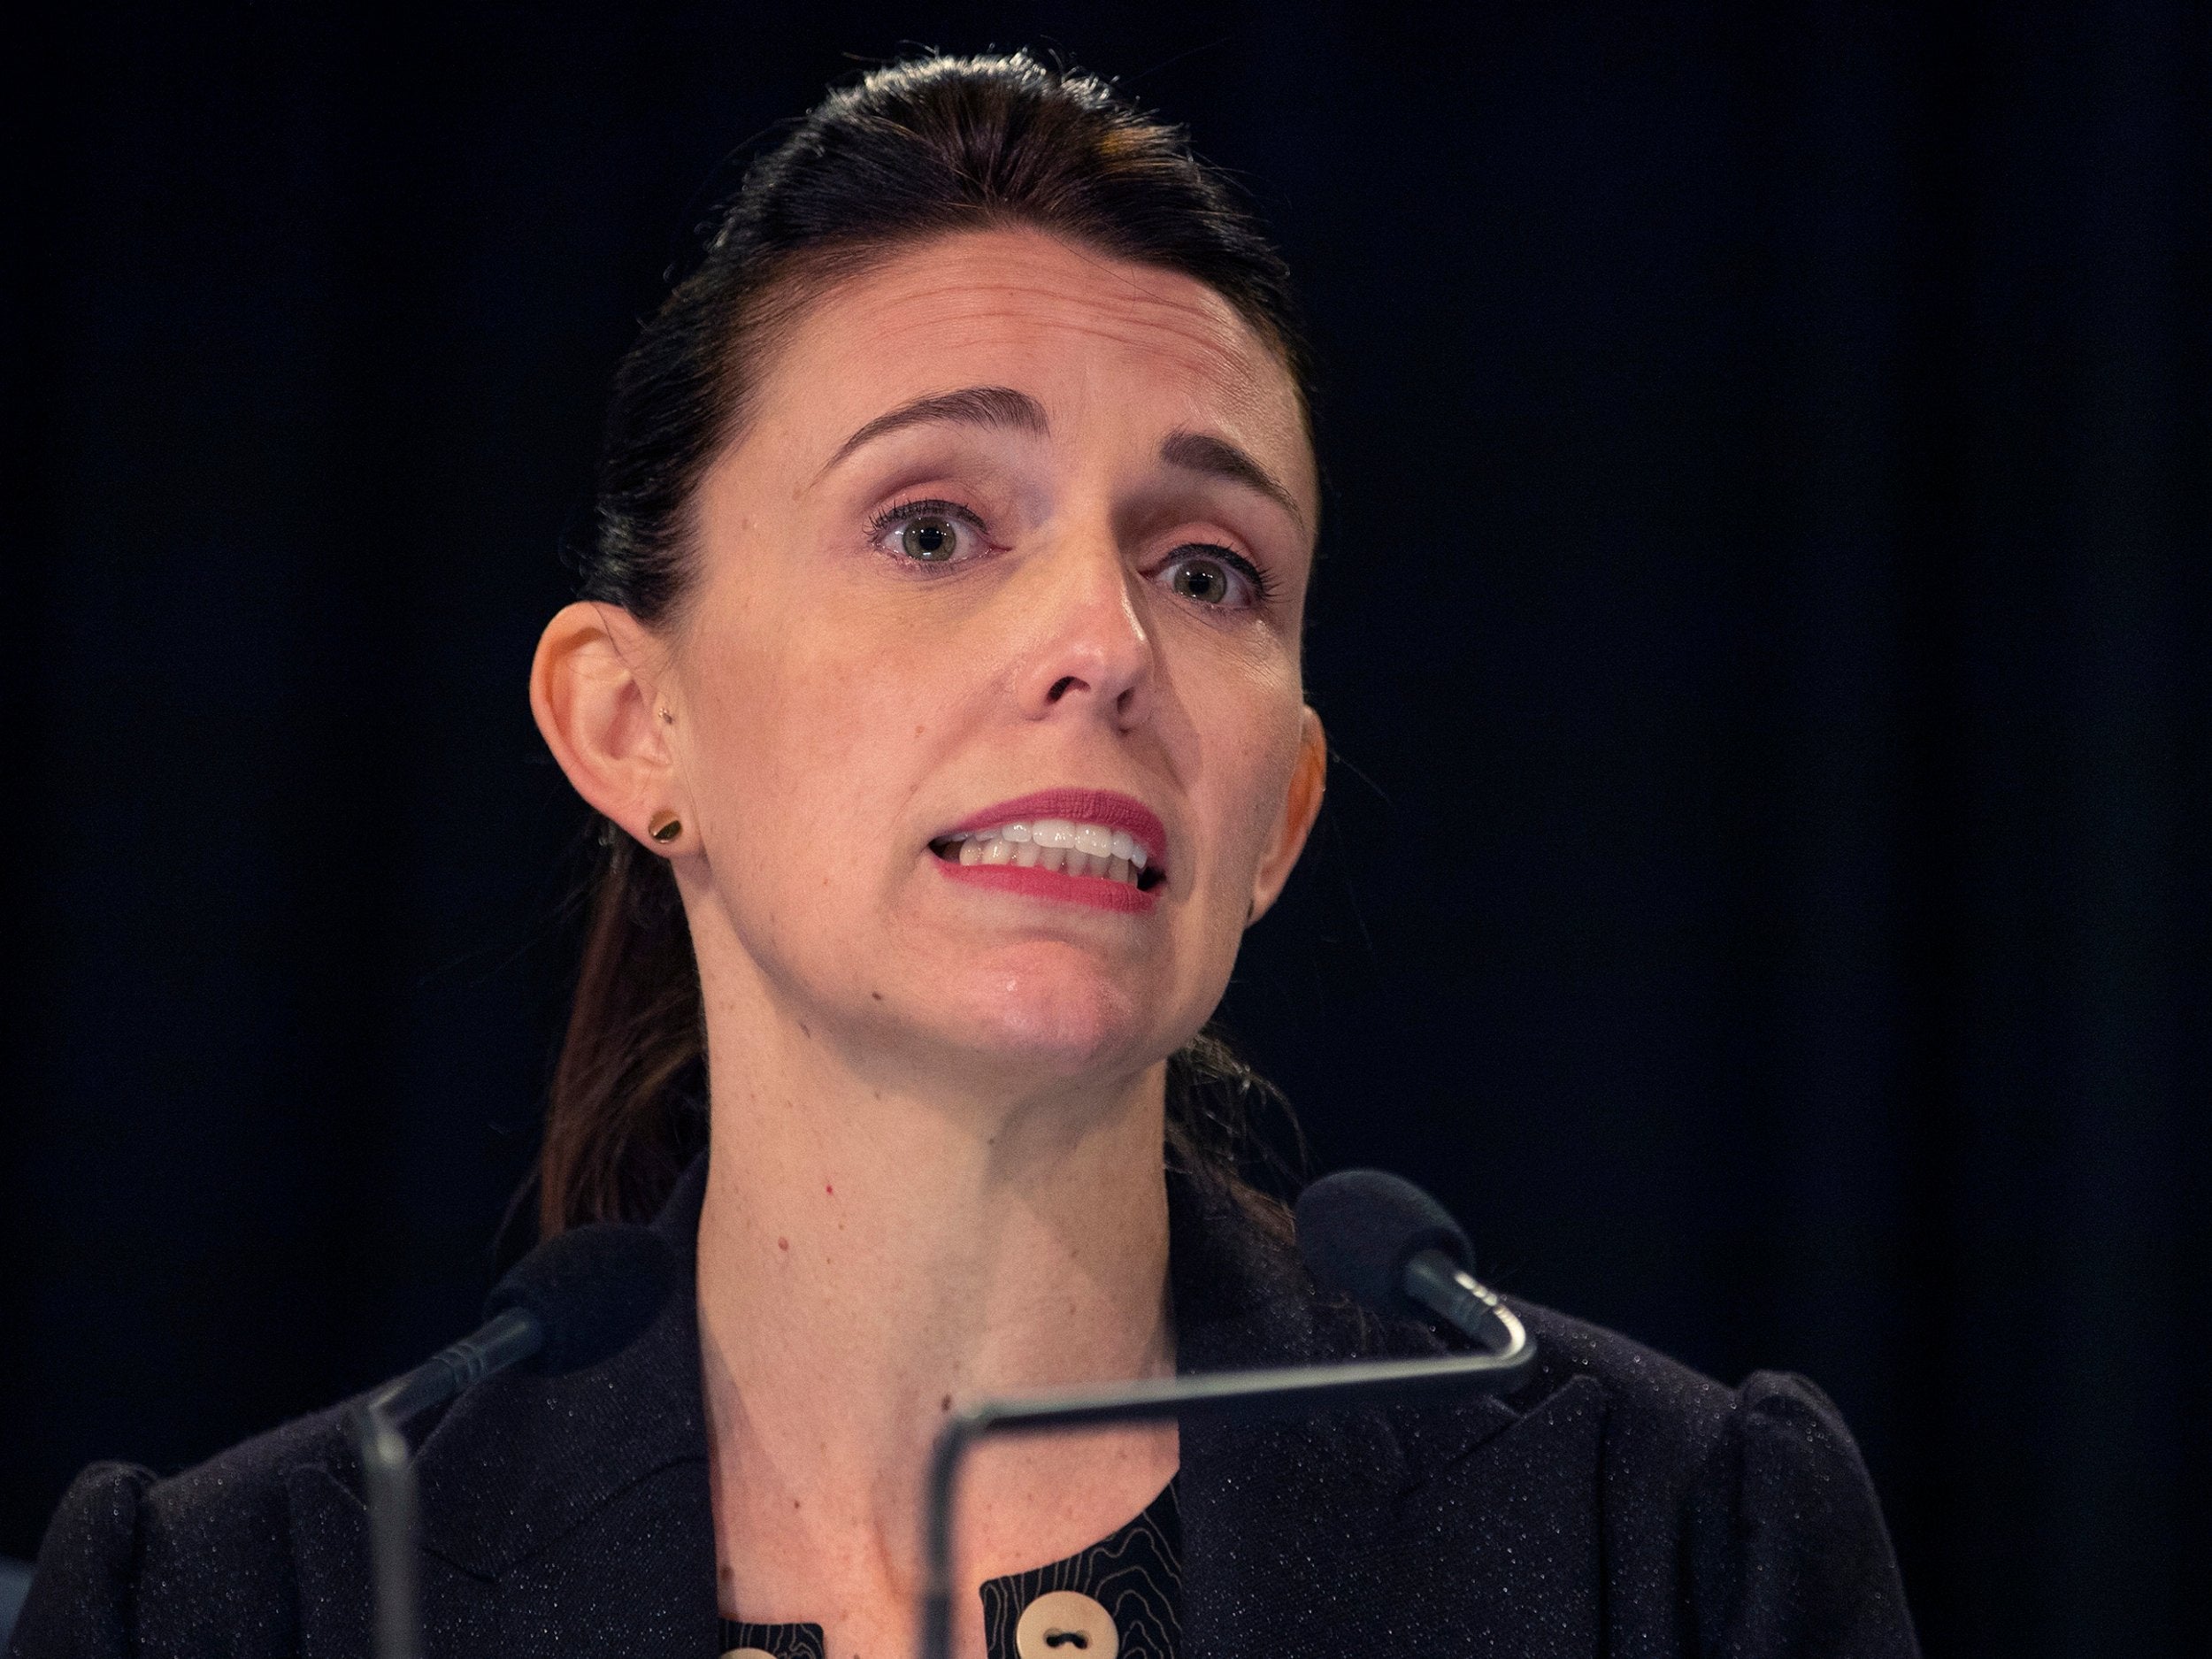 Jacinda Ardern issued the emotional apology during her weekly post-cabinet news conference in Wellington